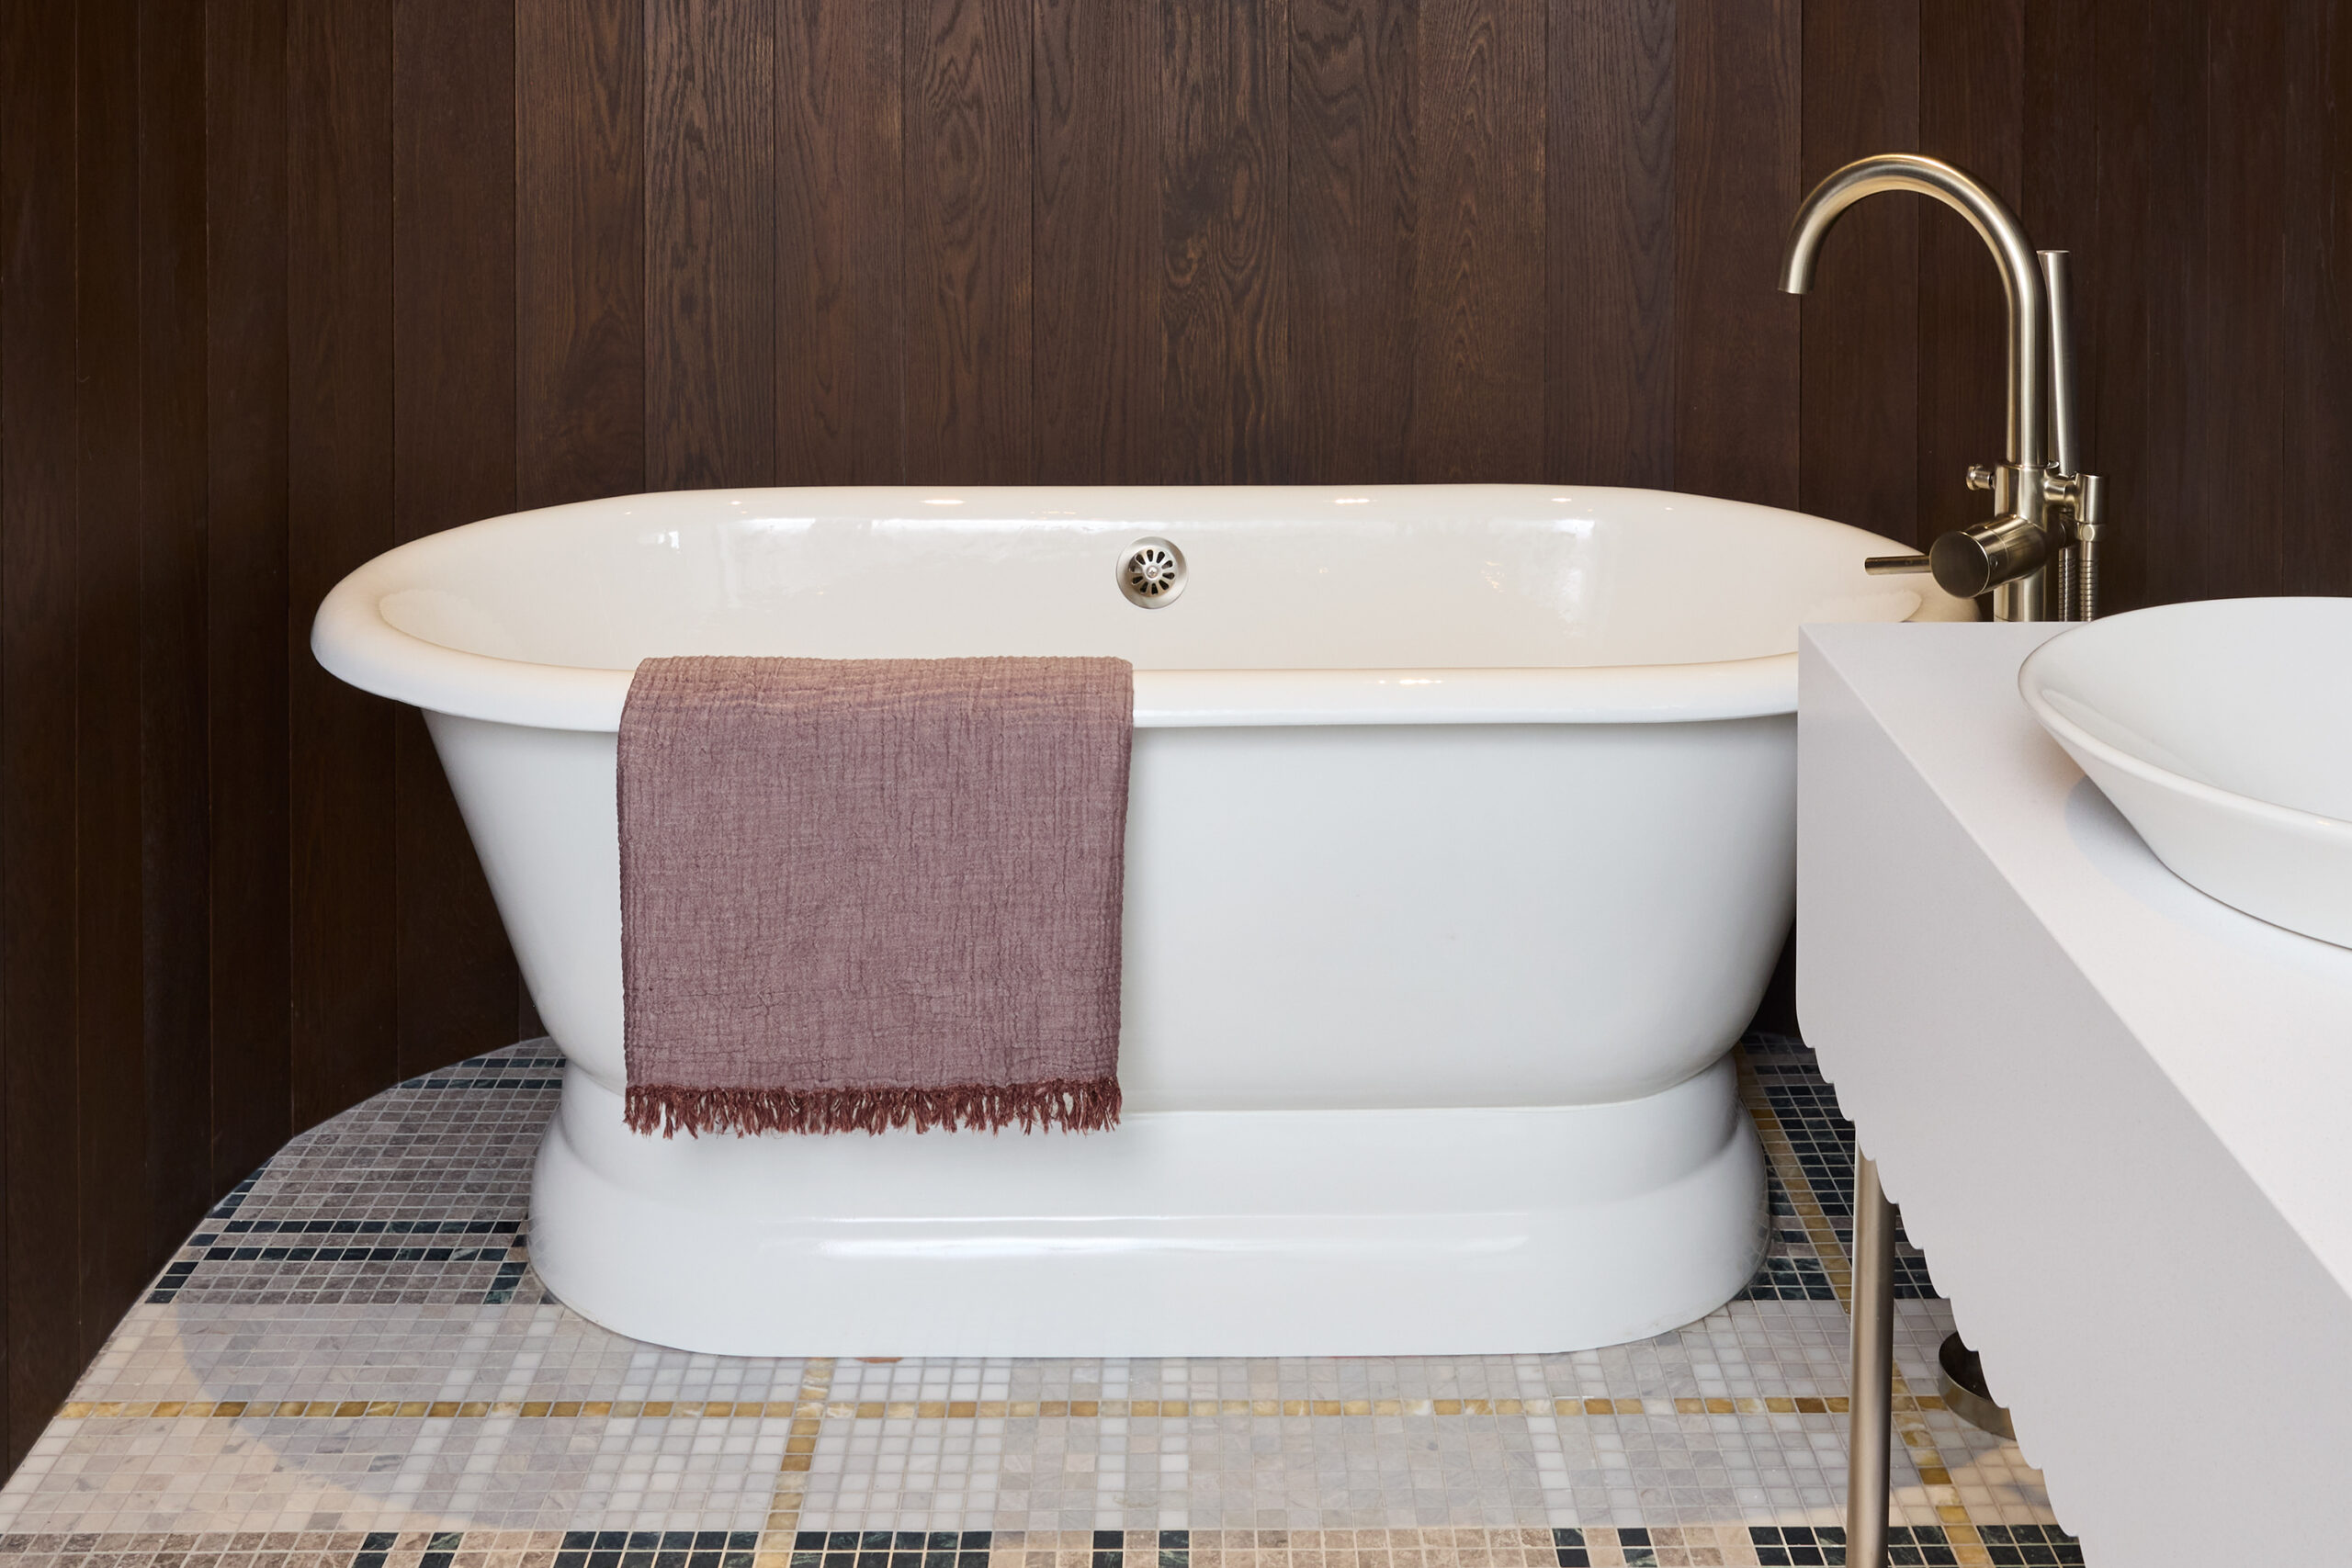 White stand alone tub, on a dark wood panelled background and gold fixtures